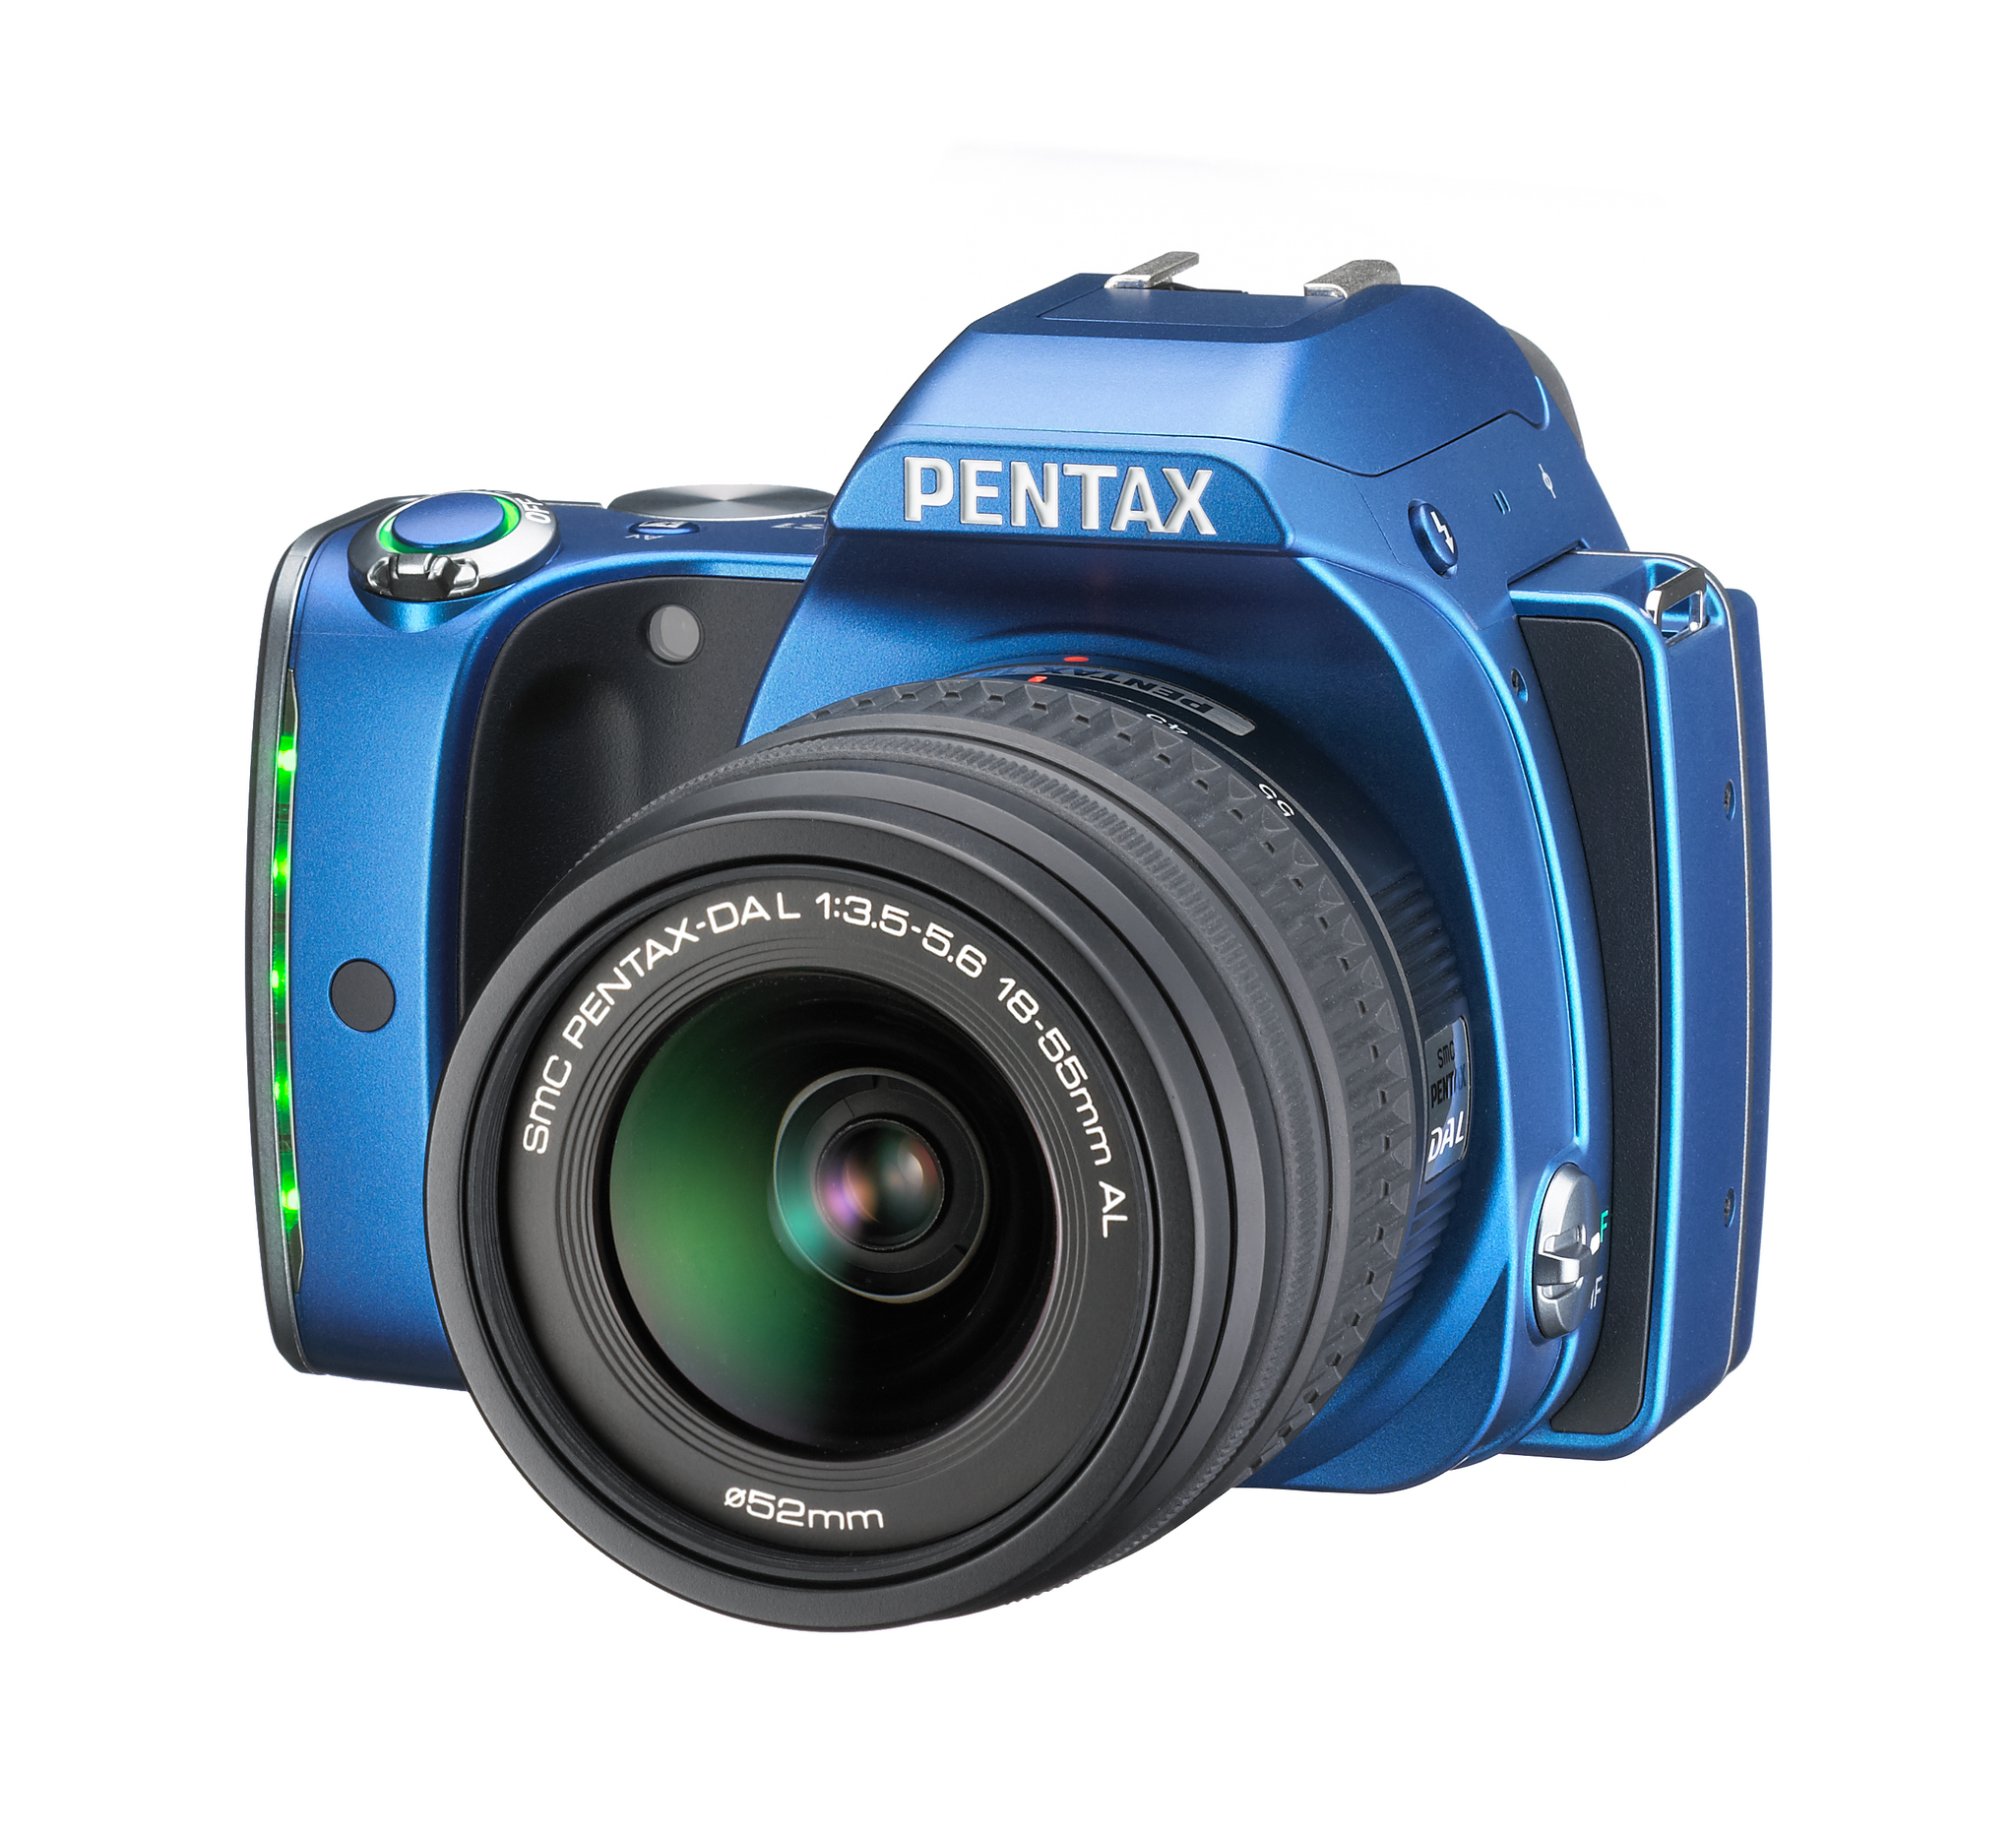 Pentax Announces Newest K-Mount DSLR Camera – the K-S1, Available for